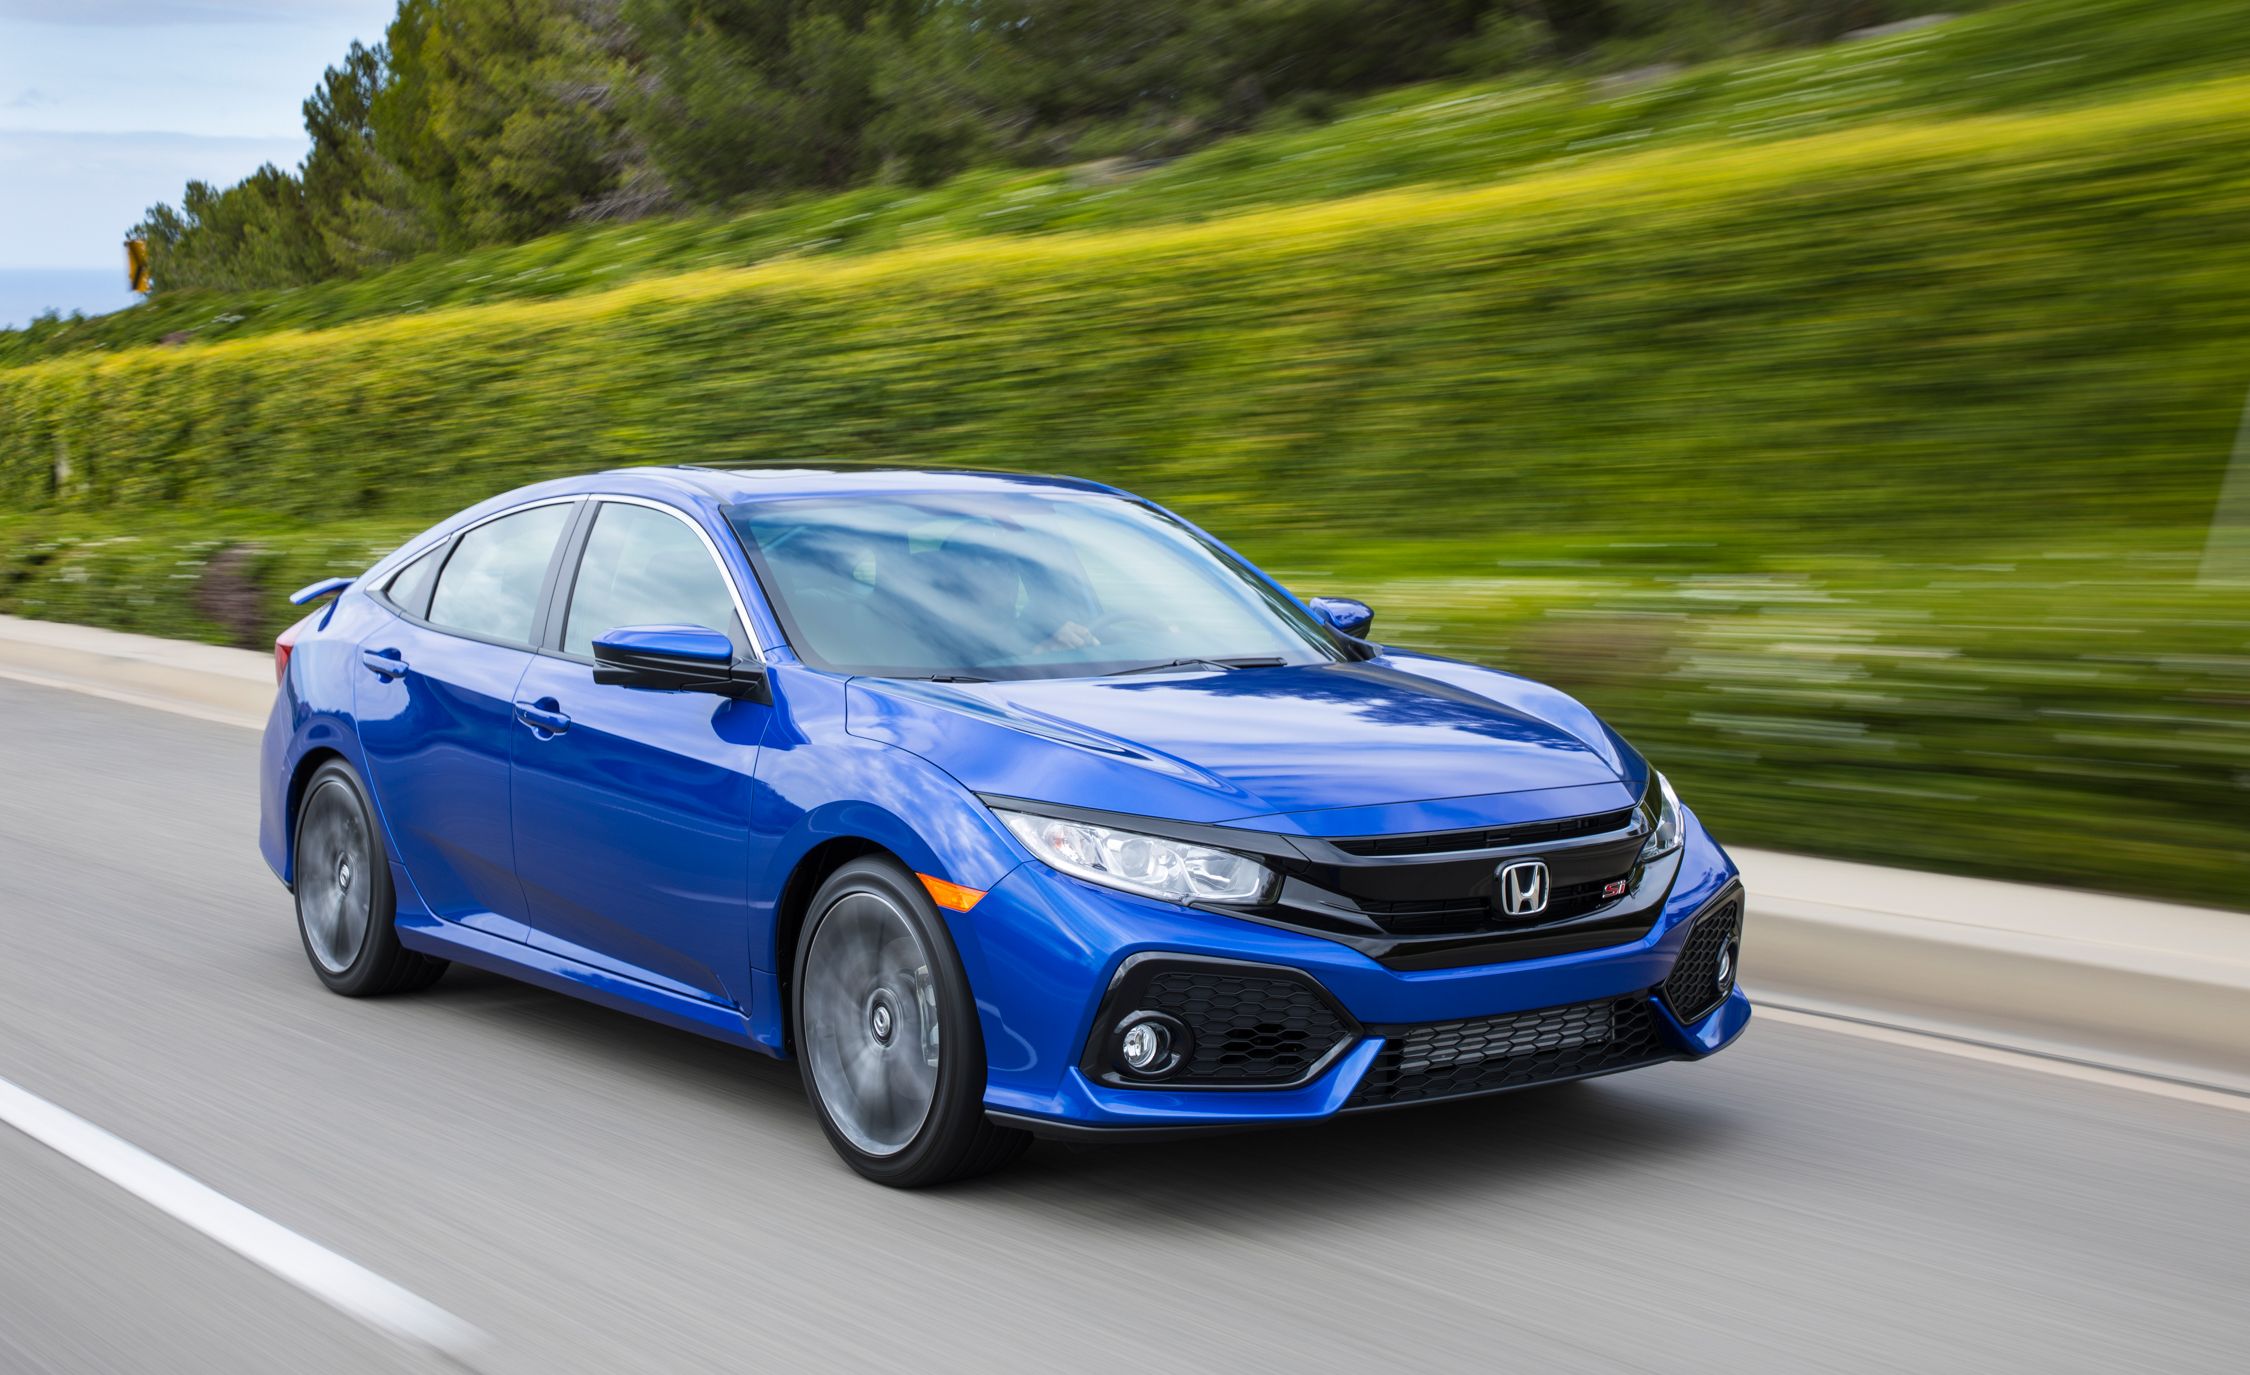 AllNew 2017 Honda Civic Hatchback Arrives This Fall in North America